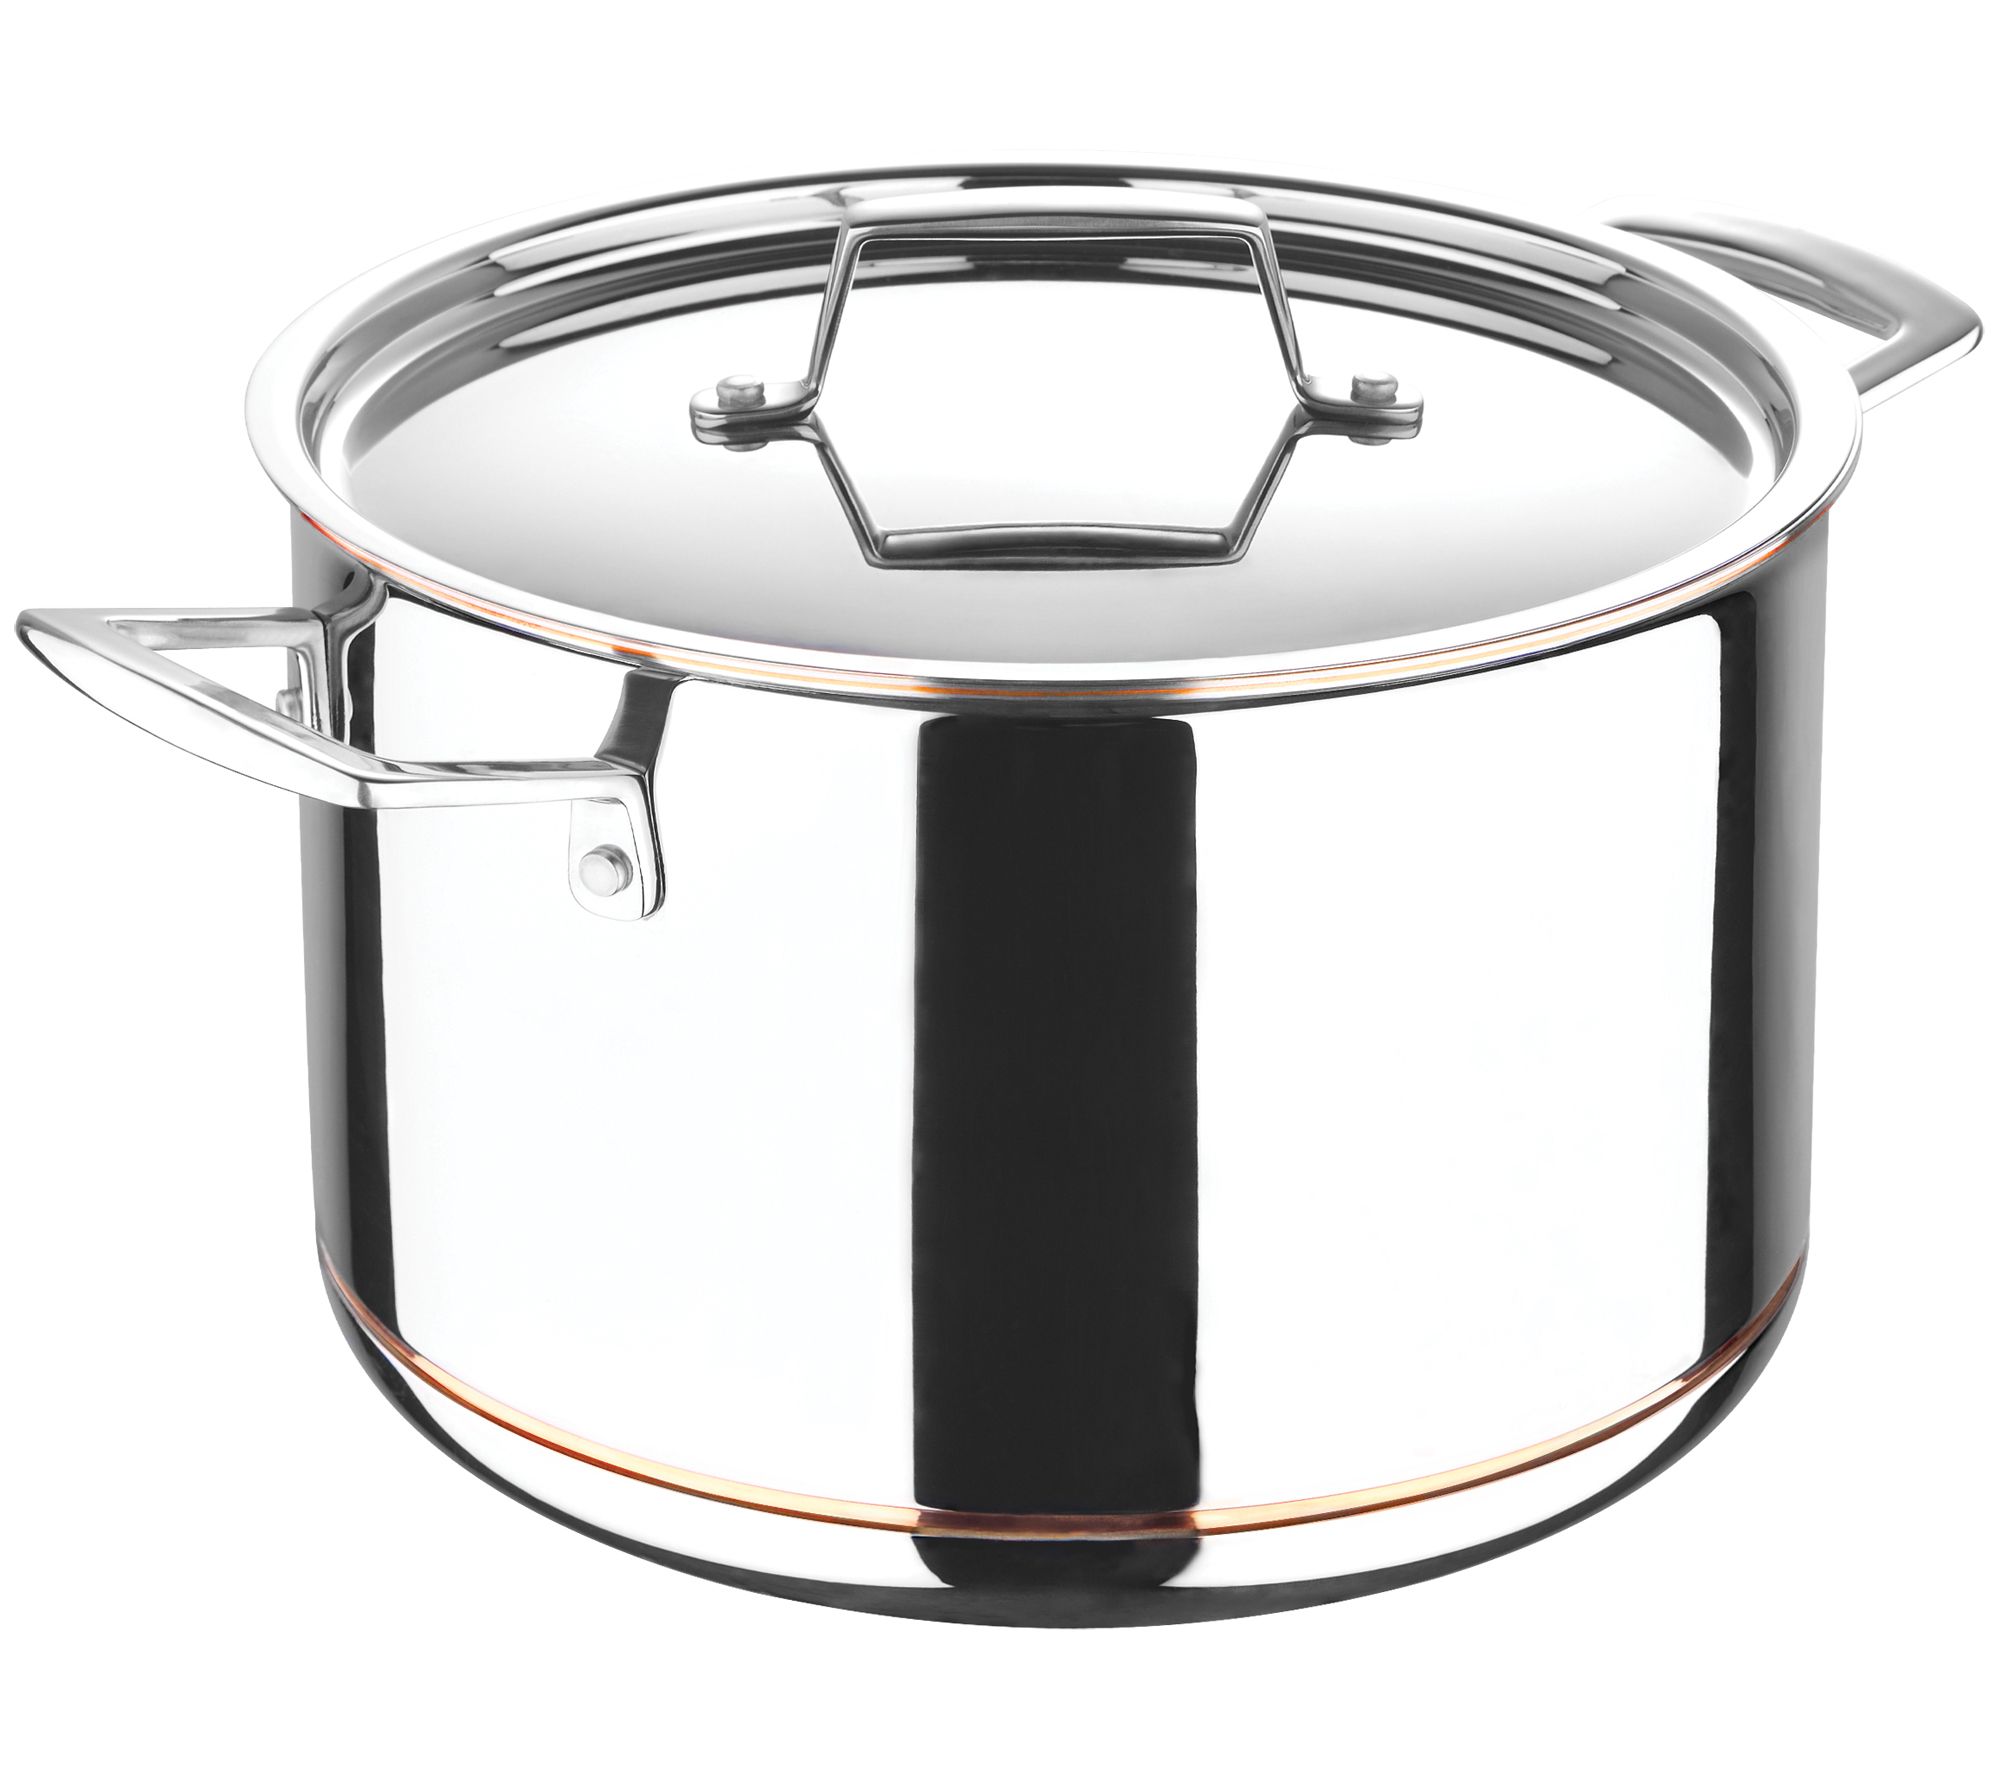 NutriChef 8 qt. Stainless Steel Stock Pot with Lid